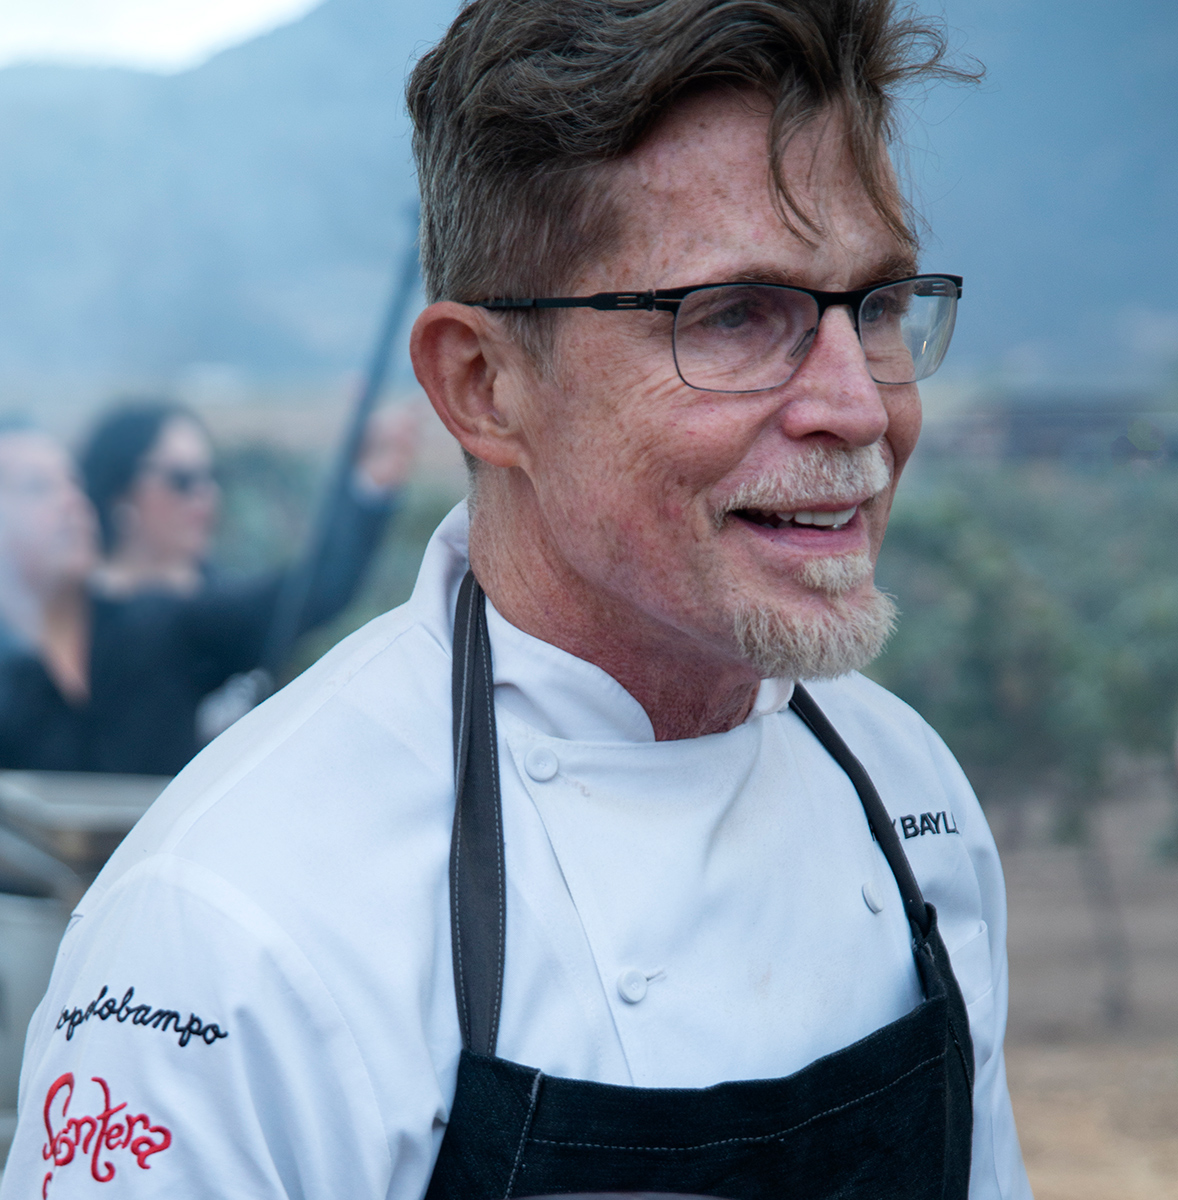 Rick-Bayless-at-Valle-de-Guadalupe-Festival 